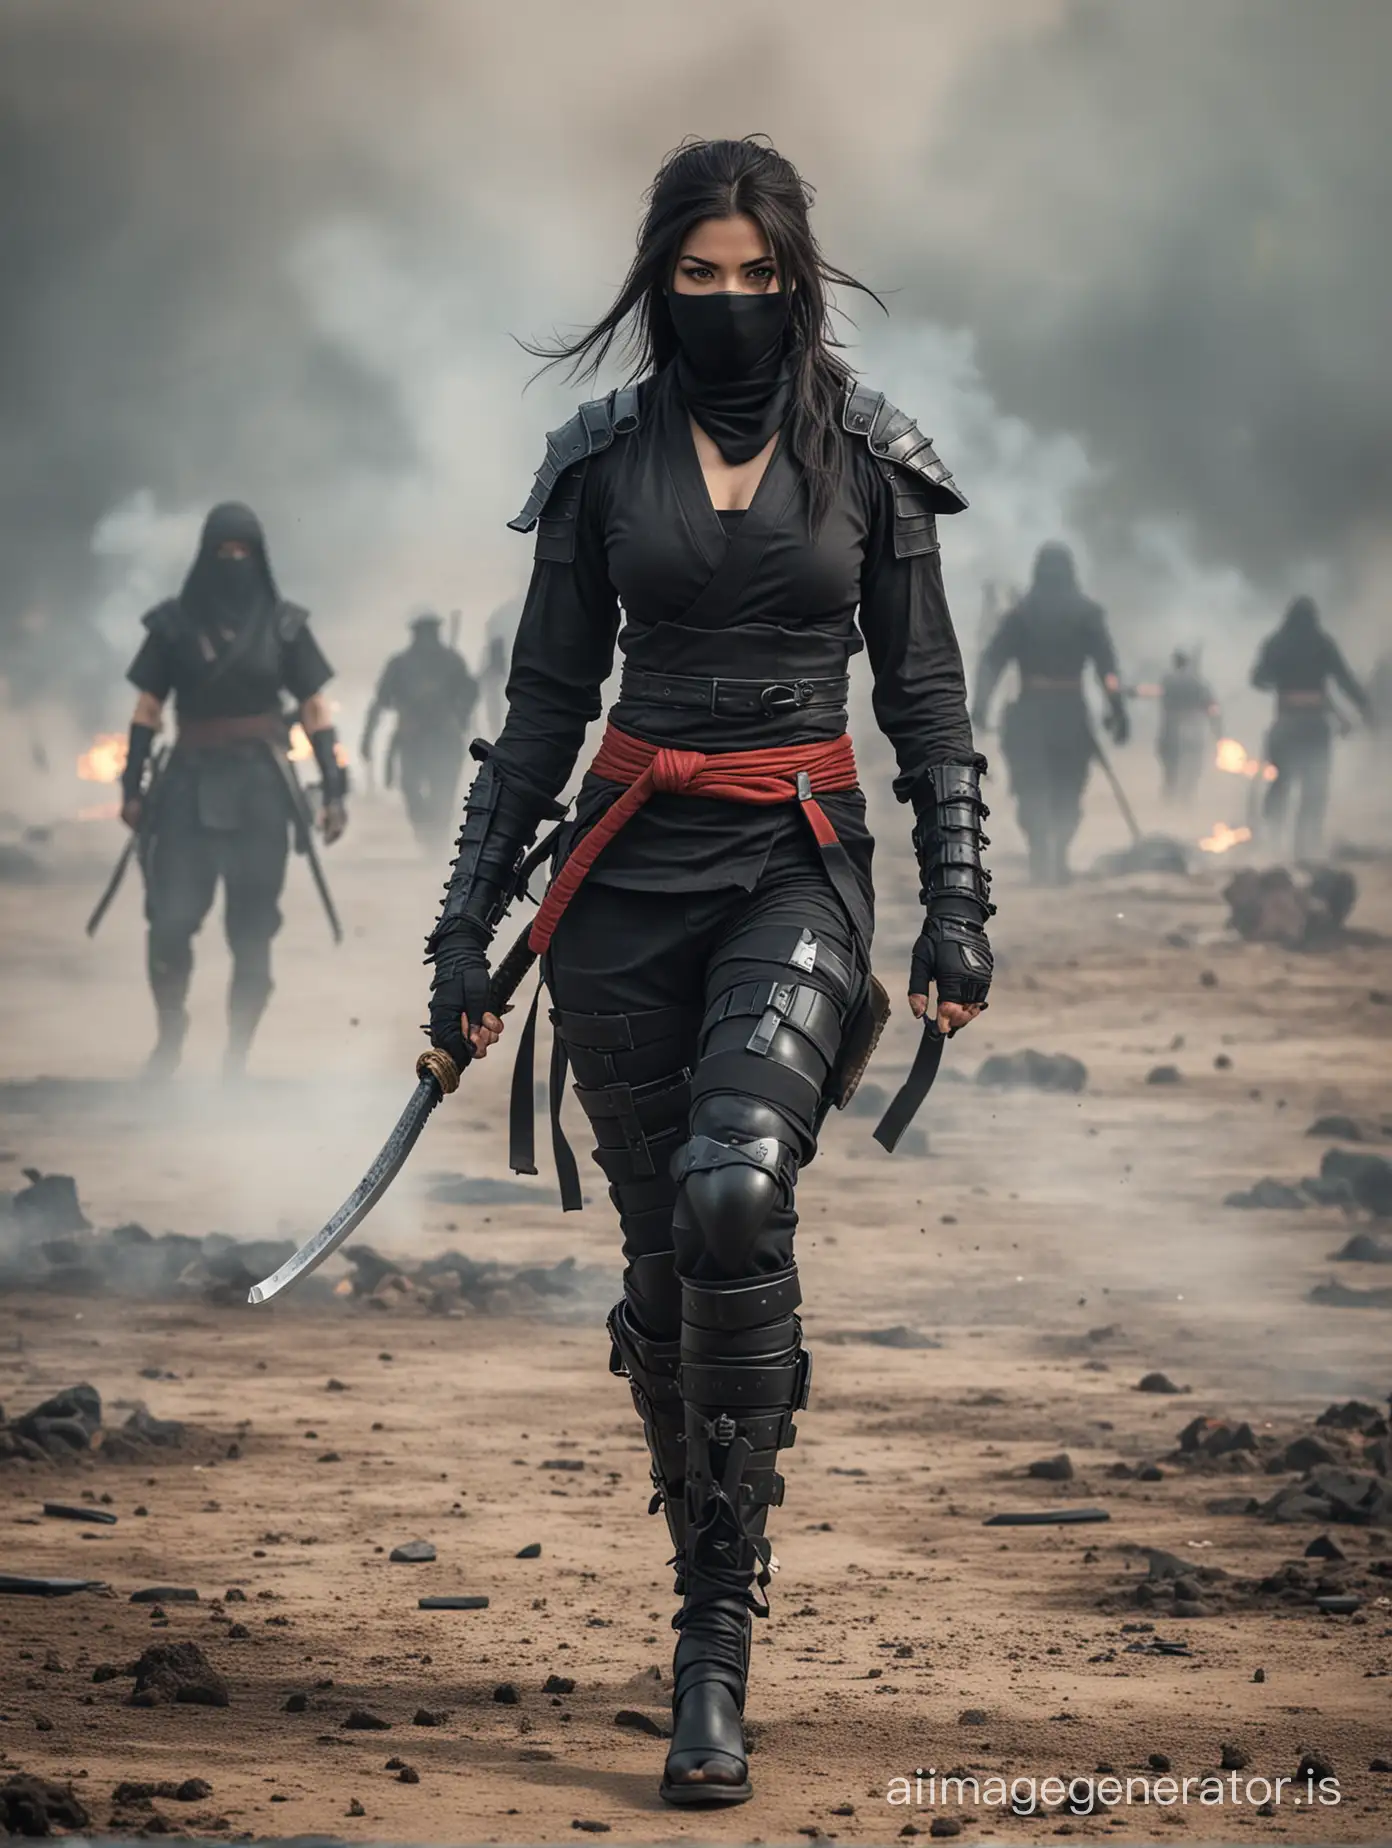 scantily dressed female ninja walking over a battlefield. The battle has been won, smoke everywhere. Dead bodies on the floor. No people in the shot